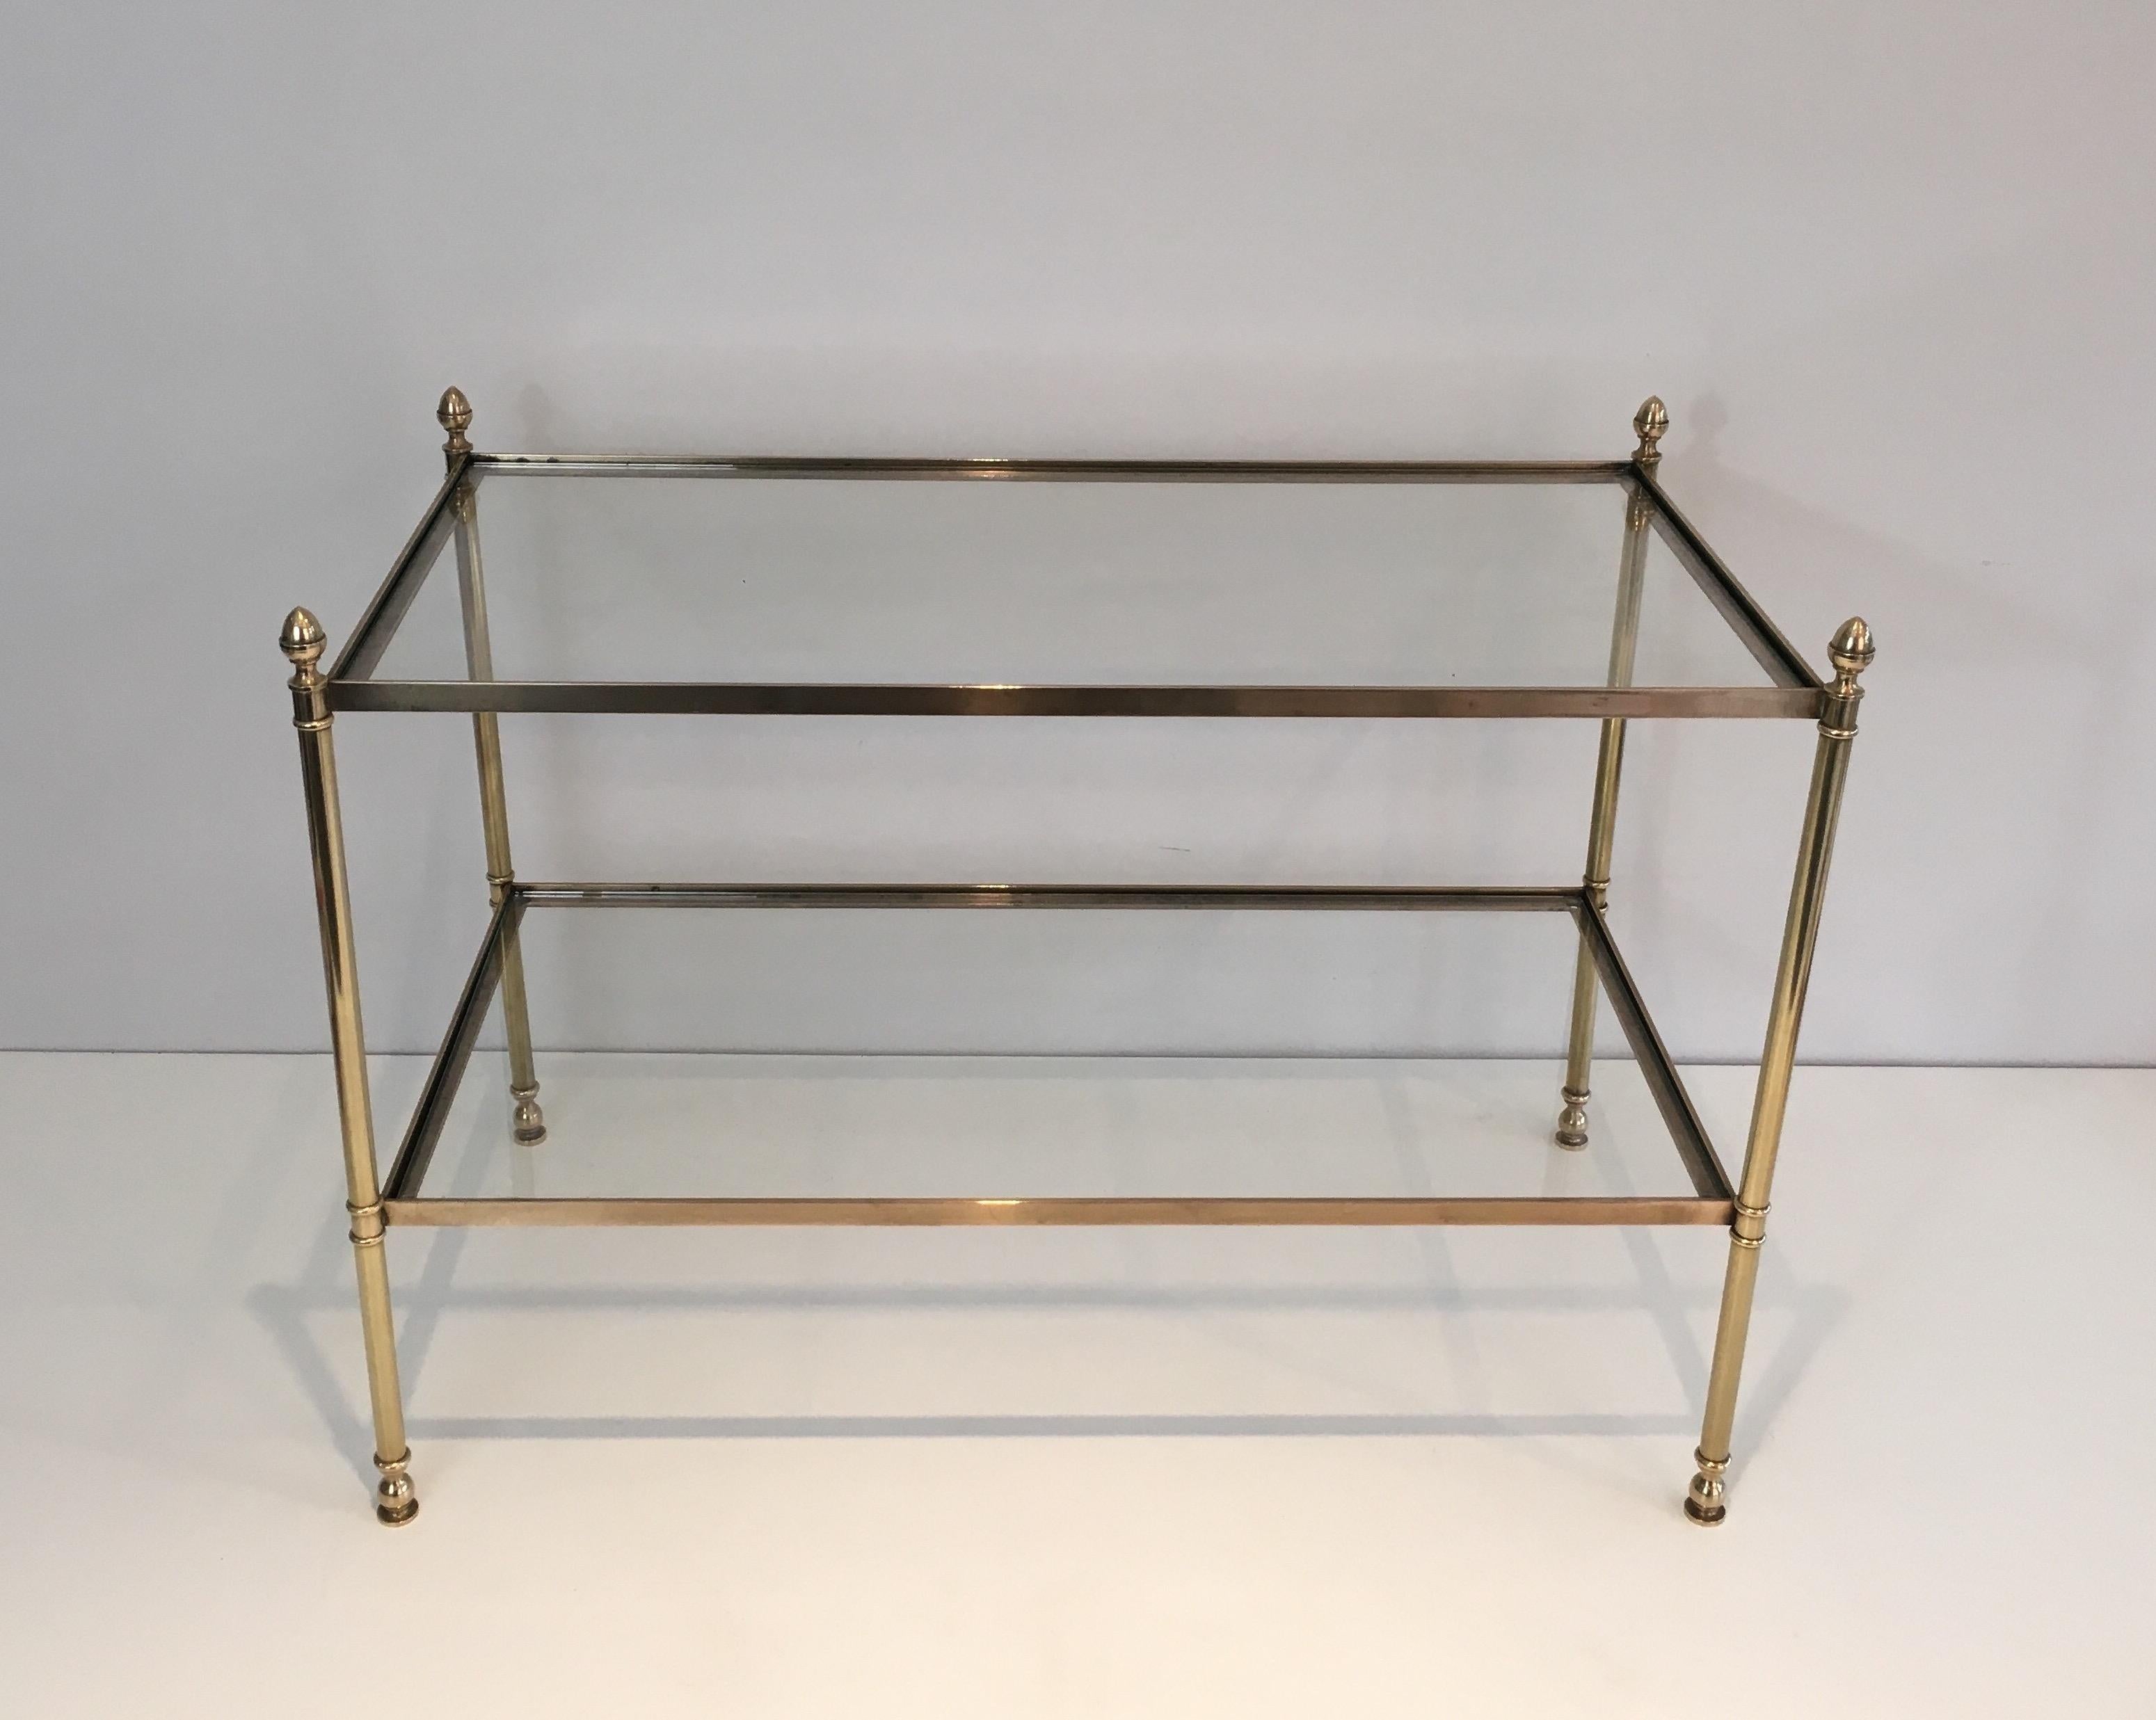 This nice neoclassical side table is made of brass with 2 glass shelves. This is a very nice work by famous French designer Maison Jansen, circa 1940.